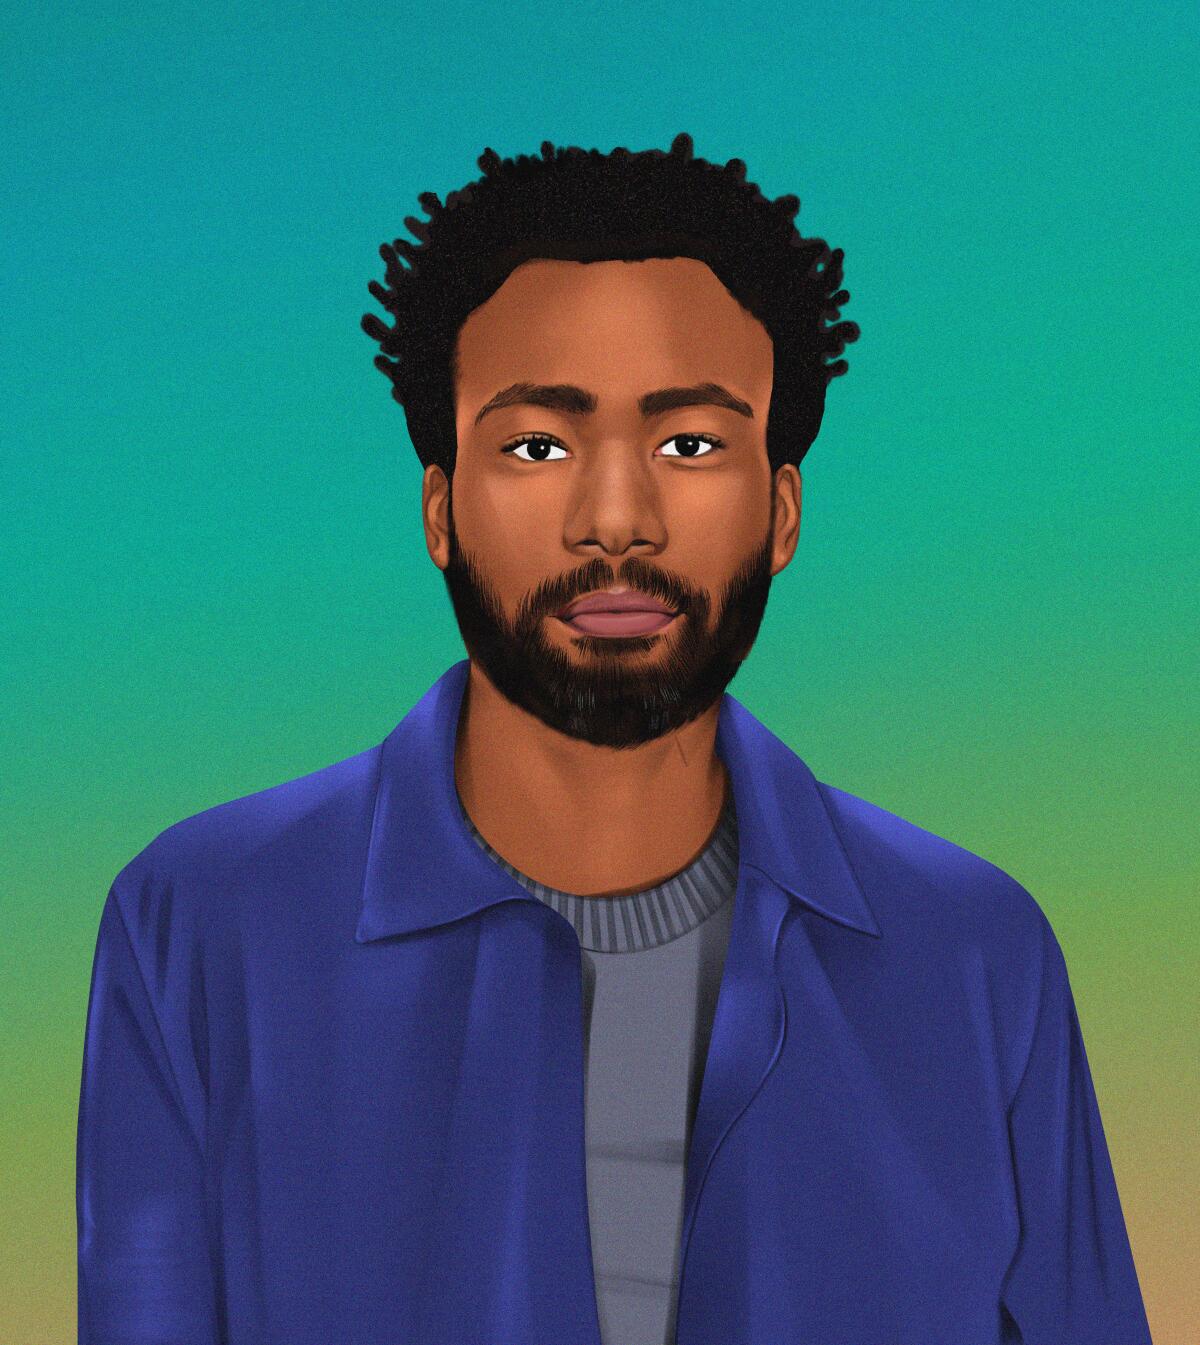 An illustration of Donald Glover.